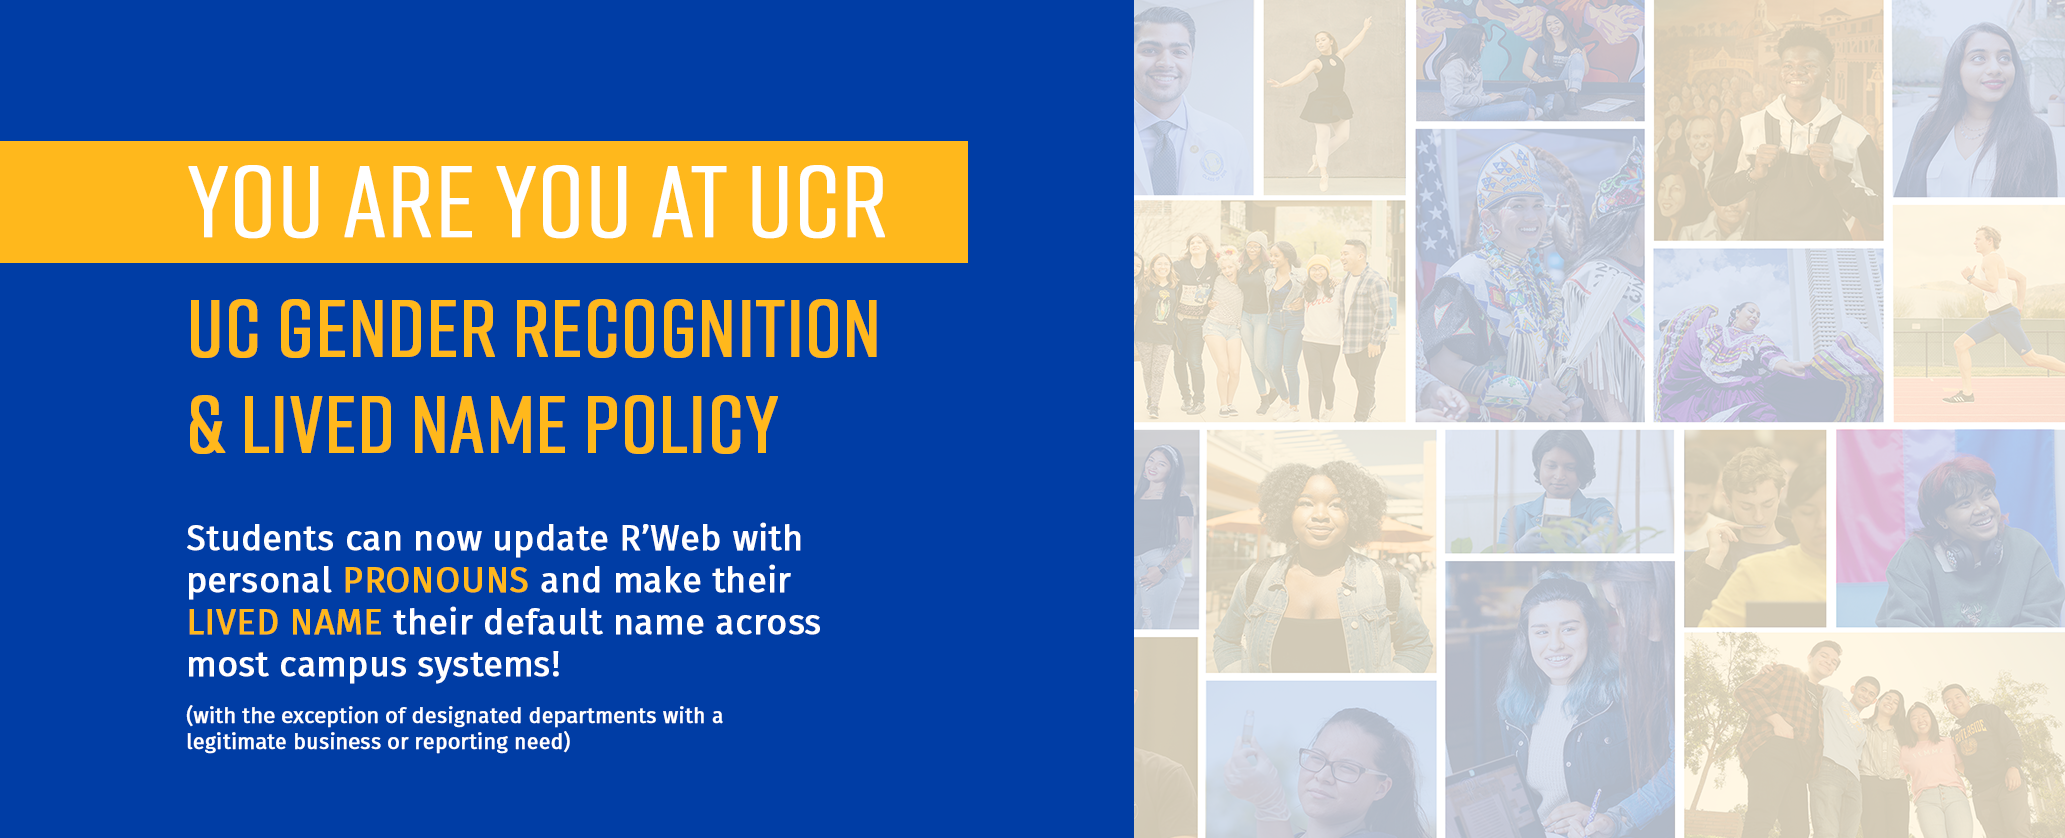 You are you at UCR. UC Gender Recognition & Lived Name Policy. Students can now update R'Web with personal pronouns and make their lived name their default name across most campus systems! (with the exception of designated departments with a legitimate business or reporting need)